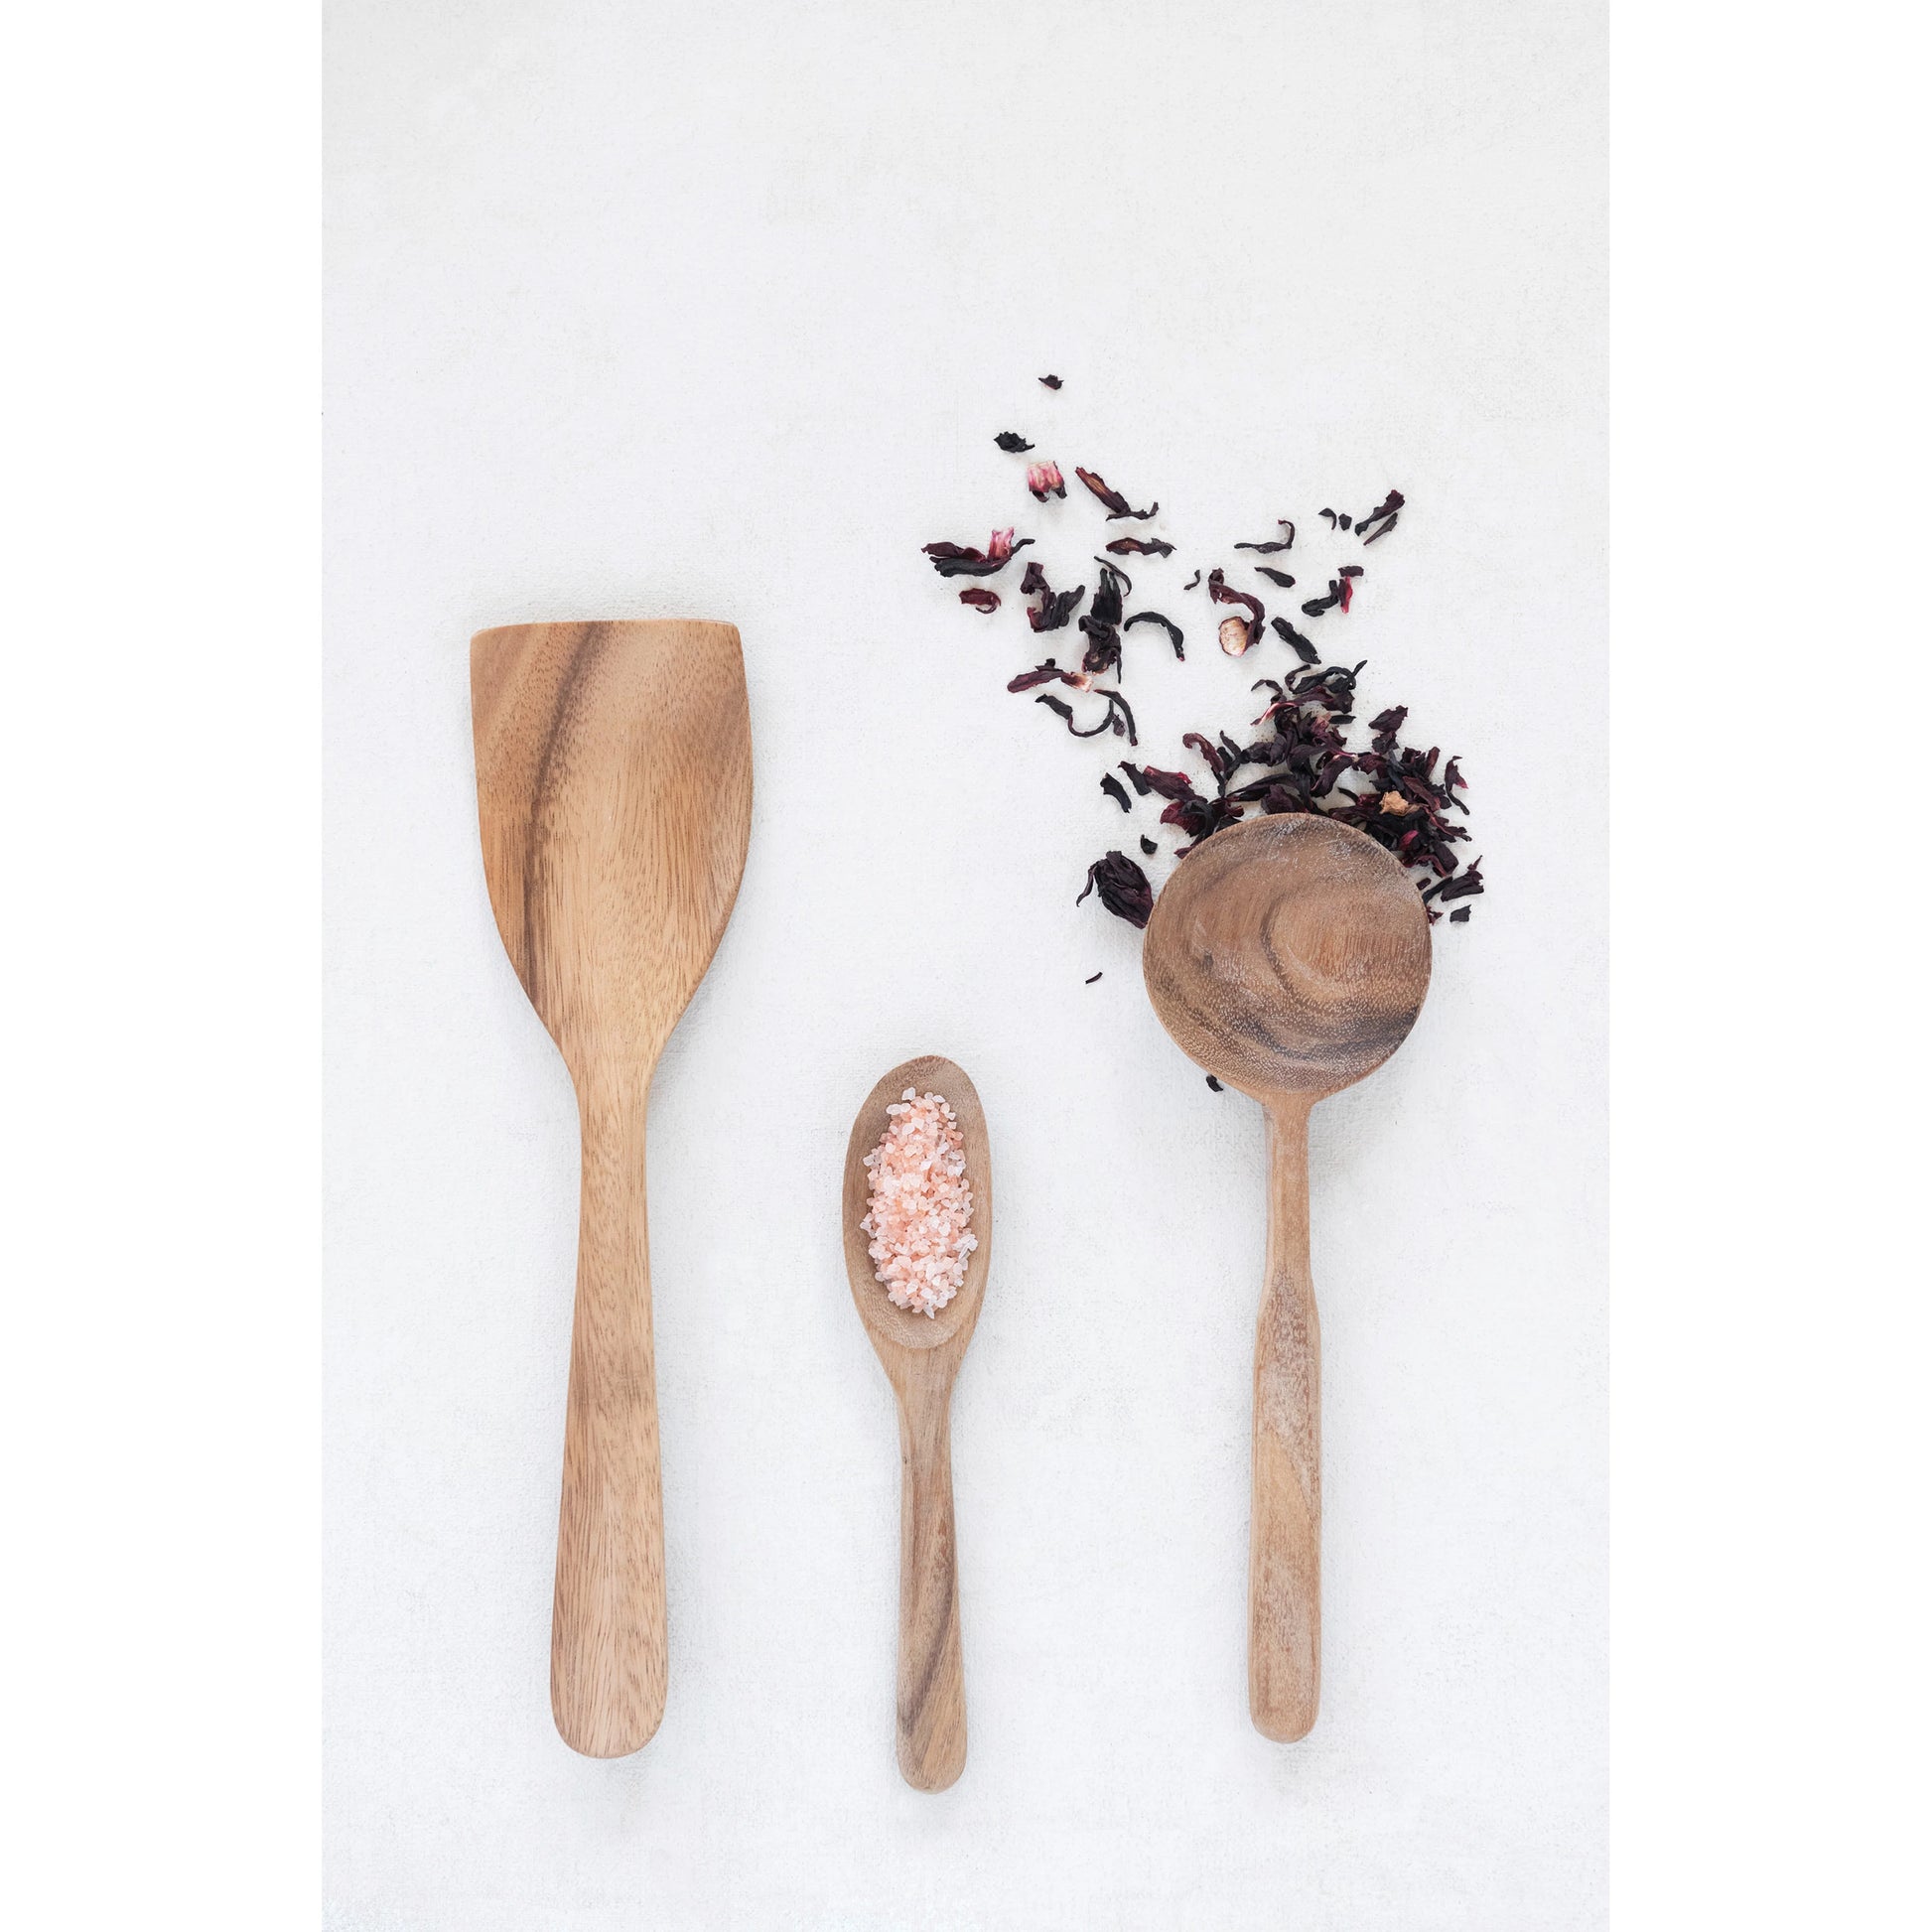 carved acacia wood spatula displayed next to two spoons and tea leaves on a white background